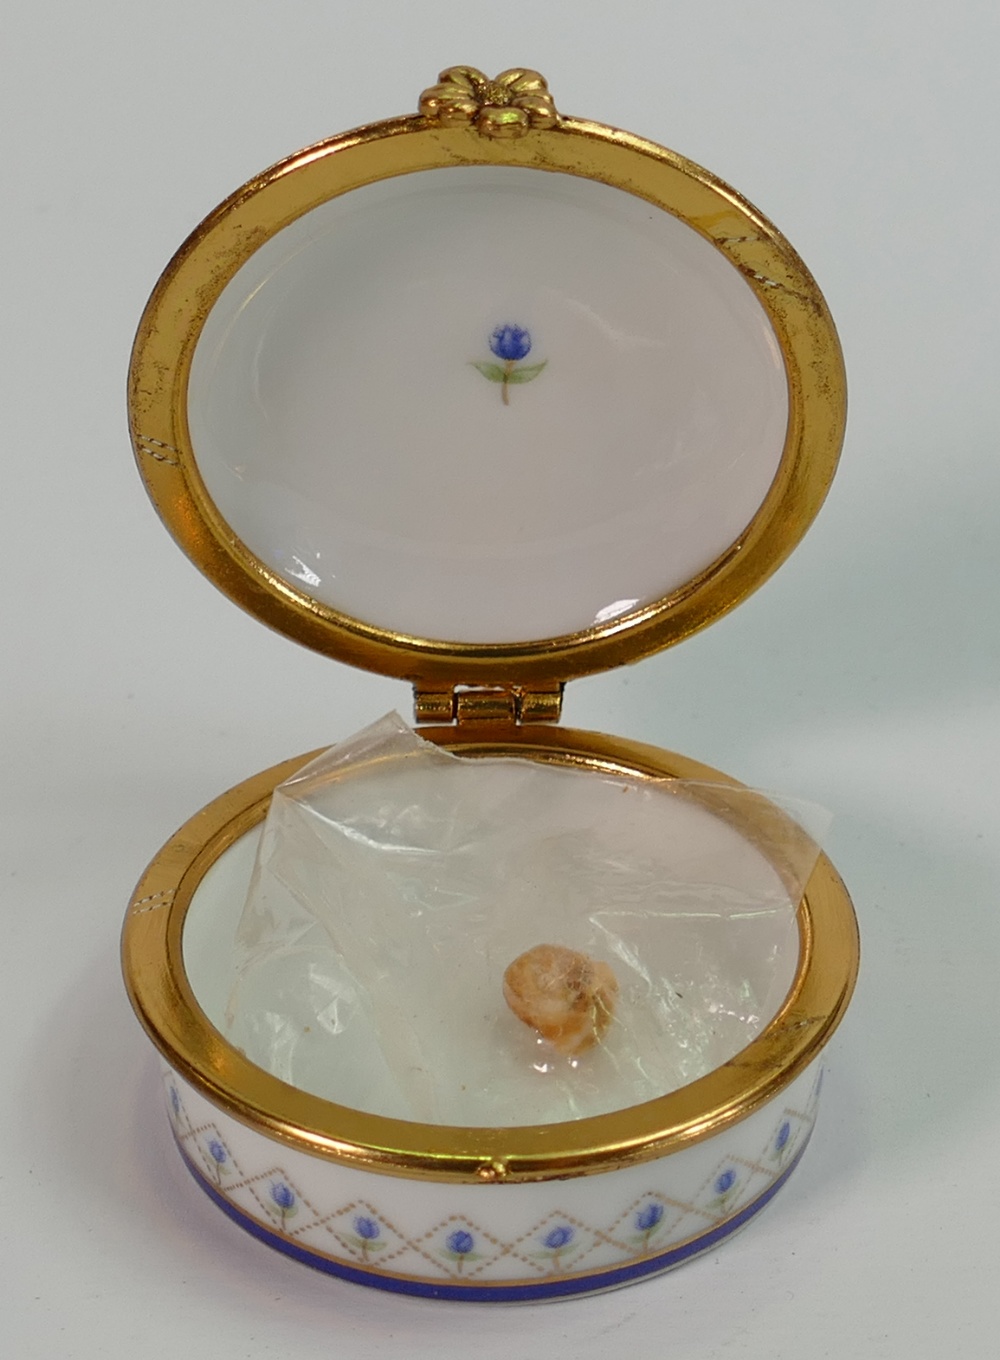 A collection of Art glassware and miniature oriental items: including Cloissone, porcelain, - Image 7 of 11